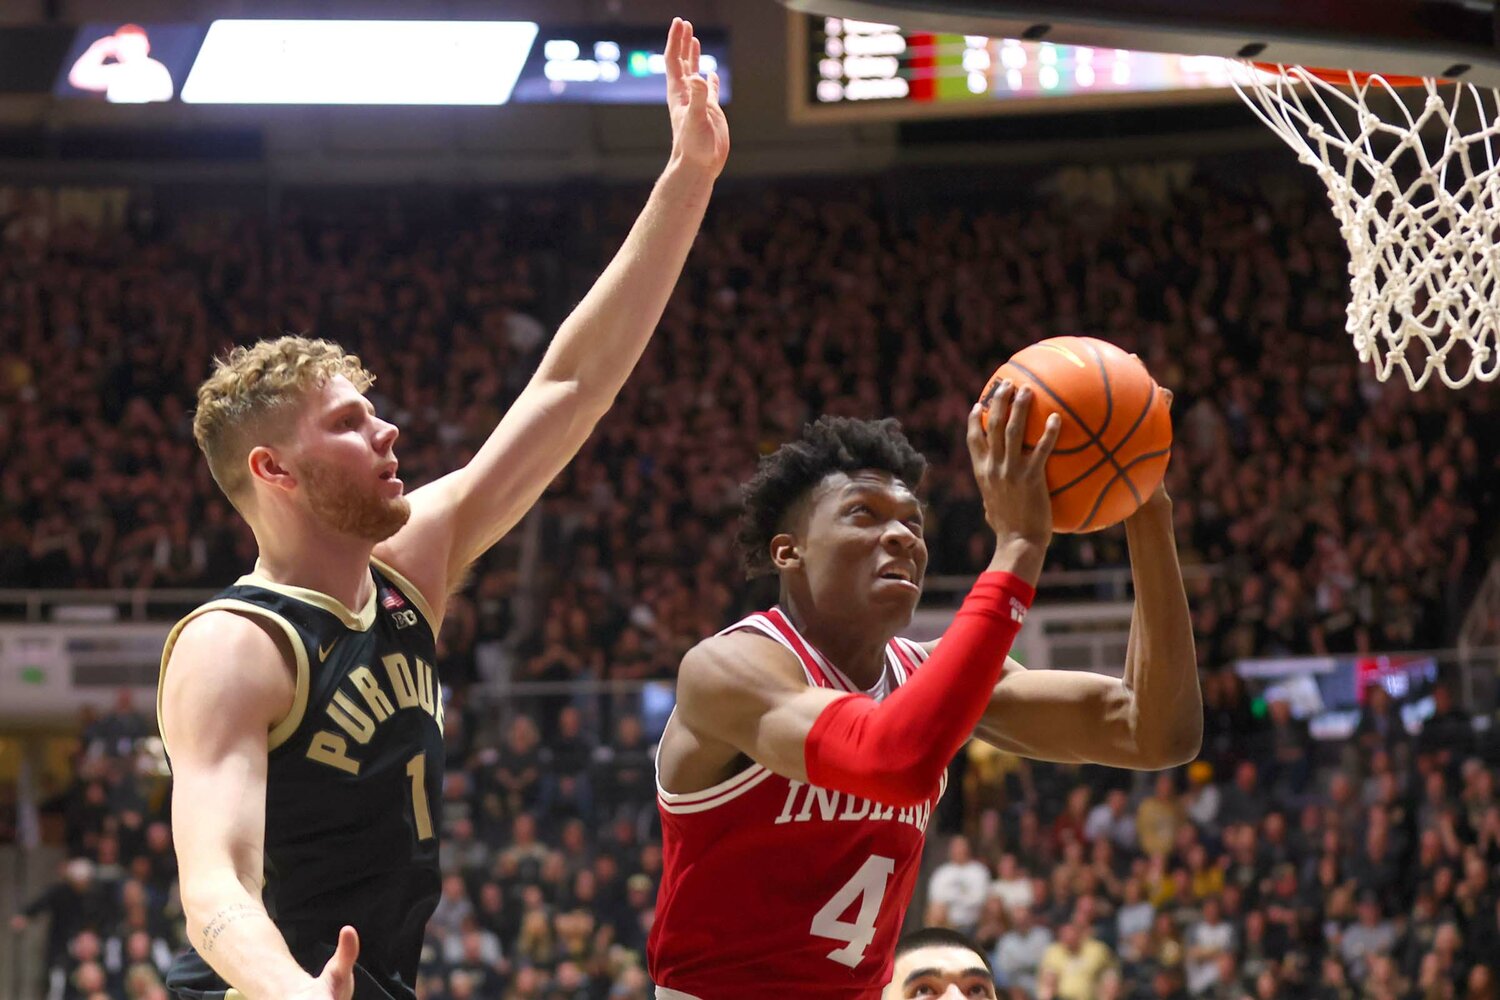 Anthony Walker of Indiana - going up for a lay-up as Caleb Furst of Purdue closes in